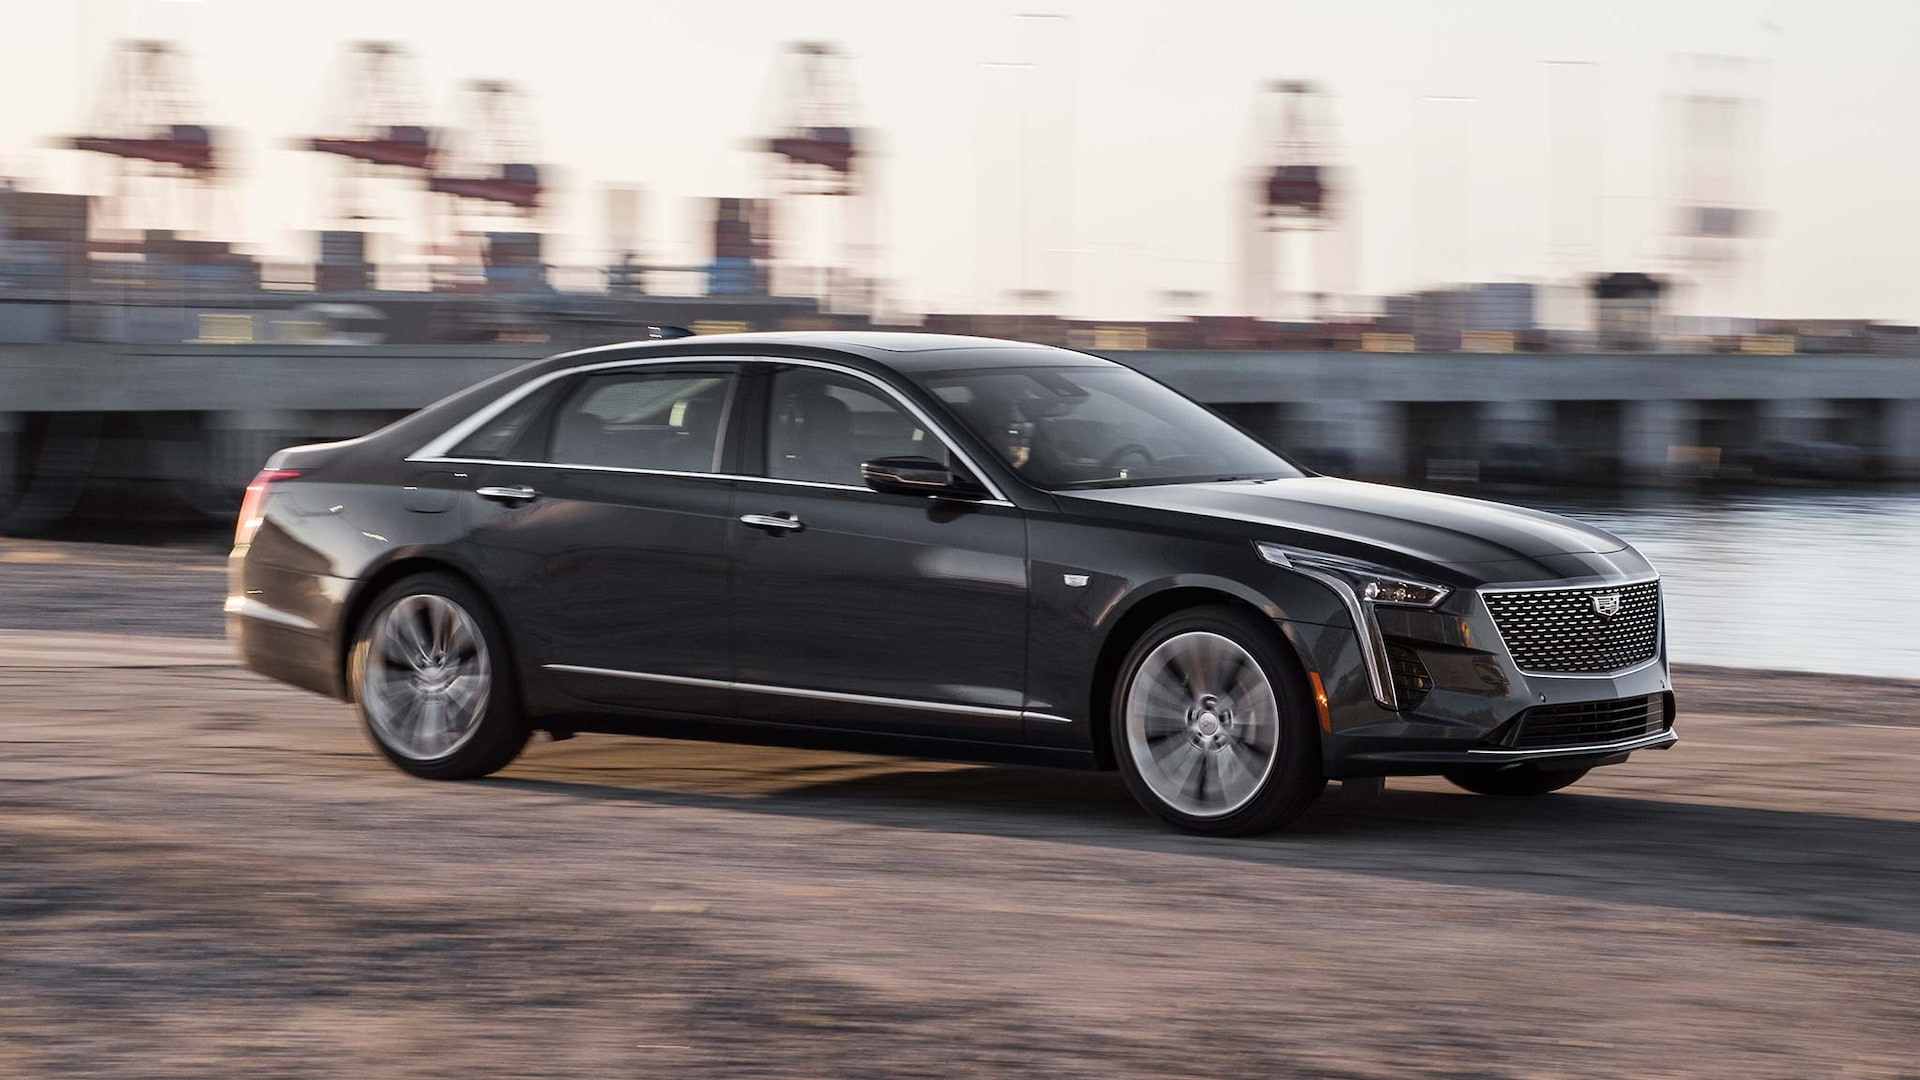 2020 Cadillac CT6 4.2TT AWD: We Test the CT6's Blackwing